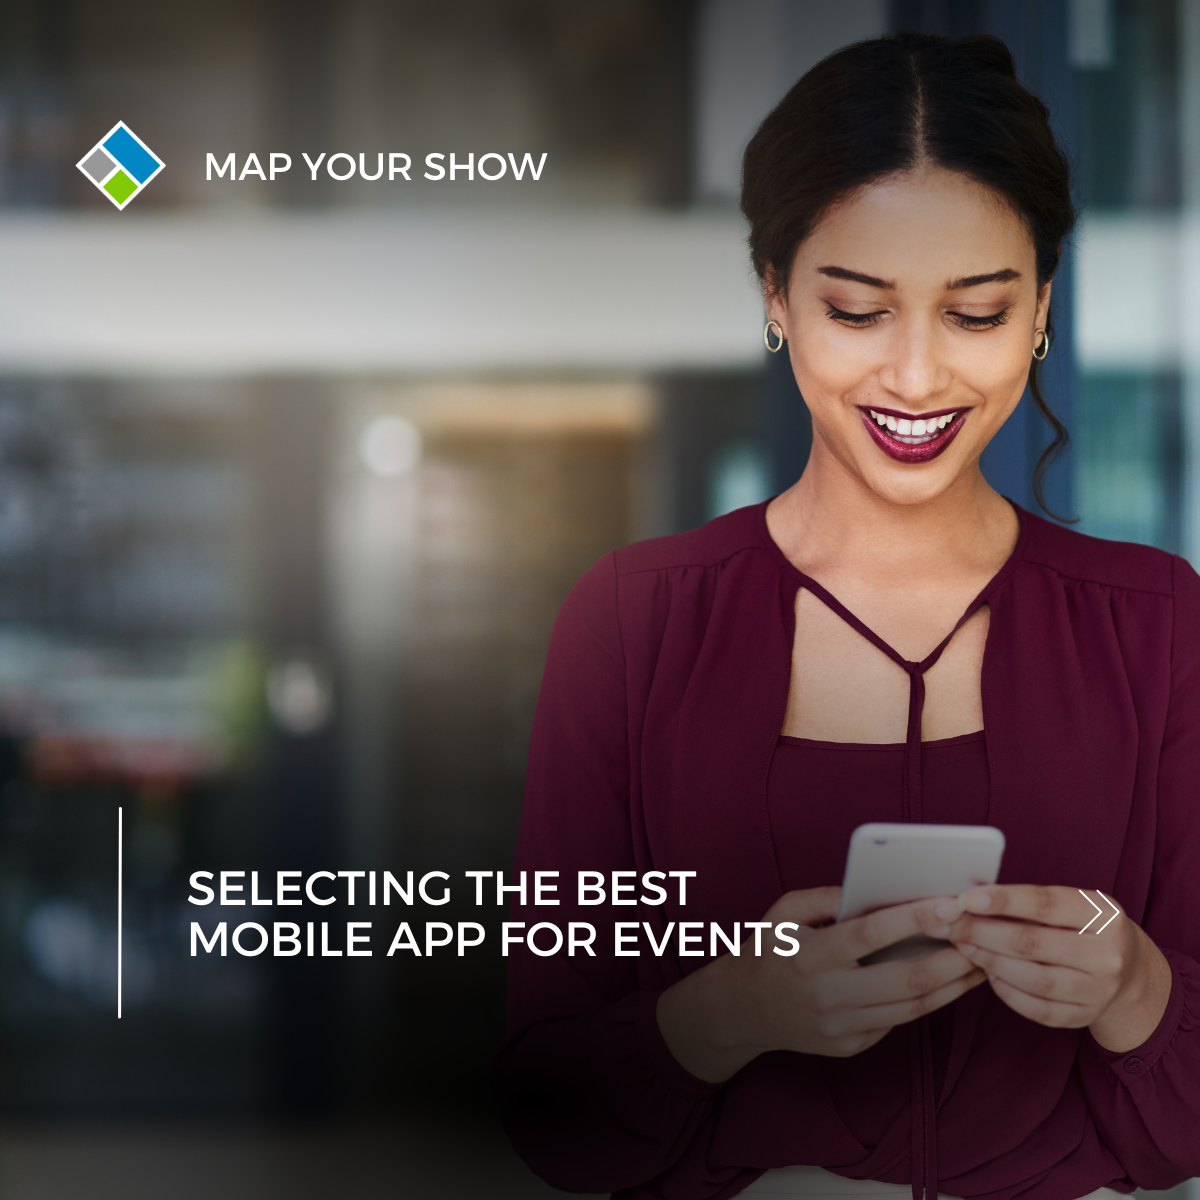 Selecting the Best Mobile App for Events. Map Your Show Event Mobile App for Trade Shows and Conferencing